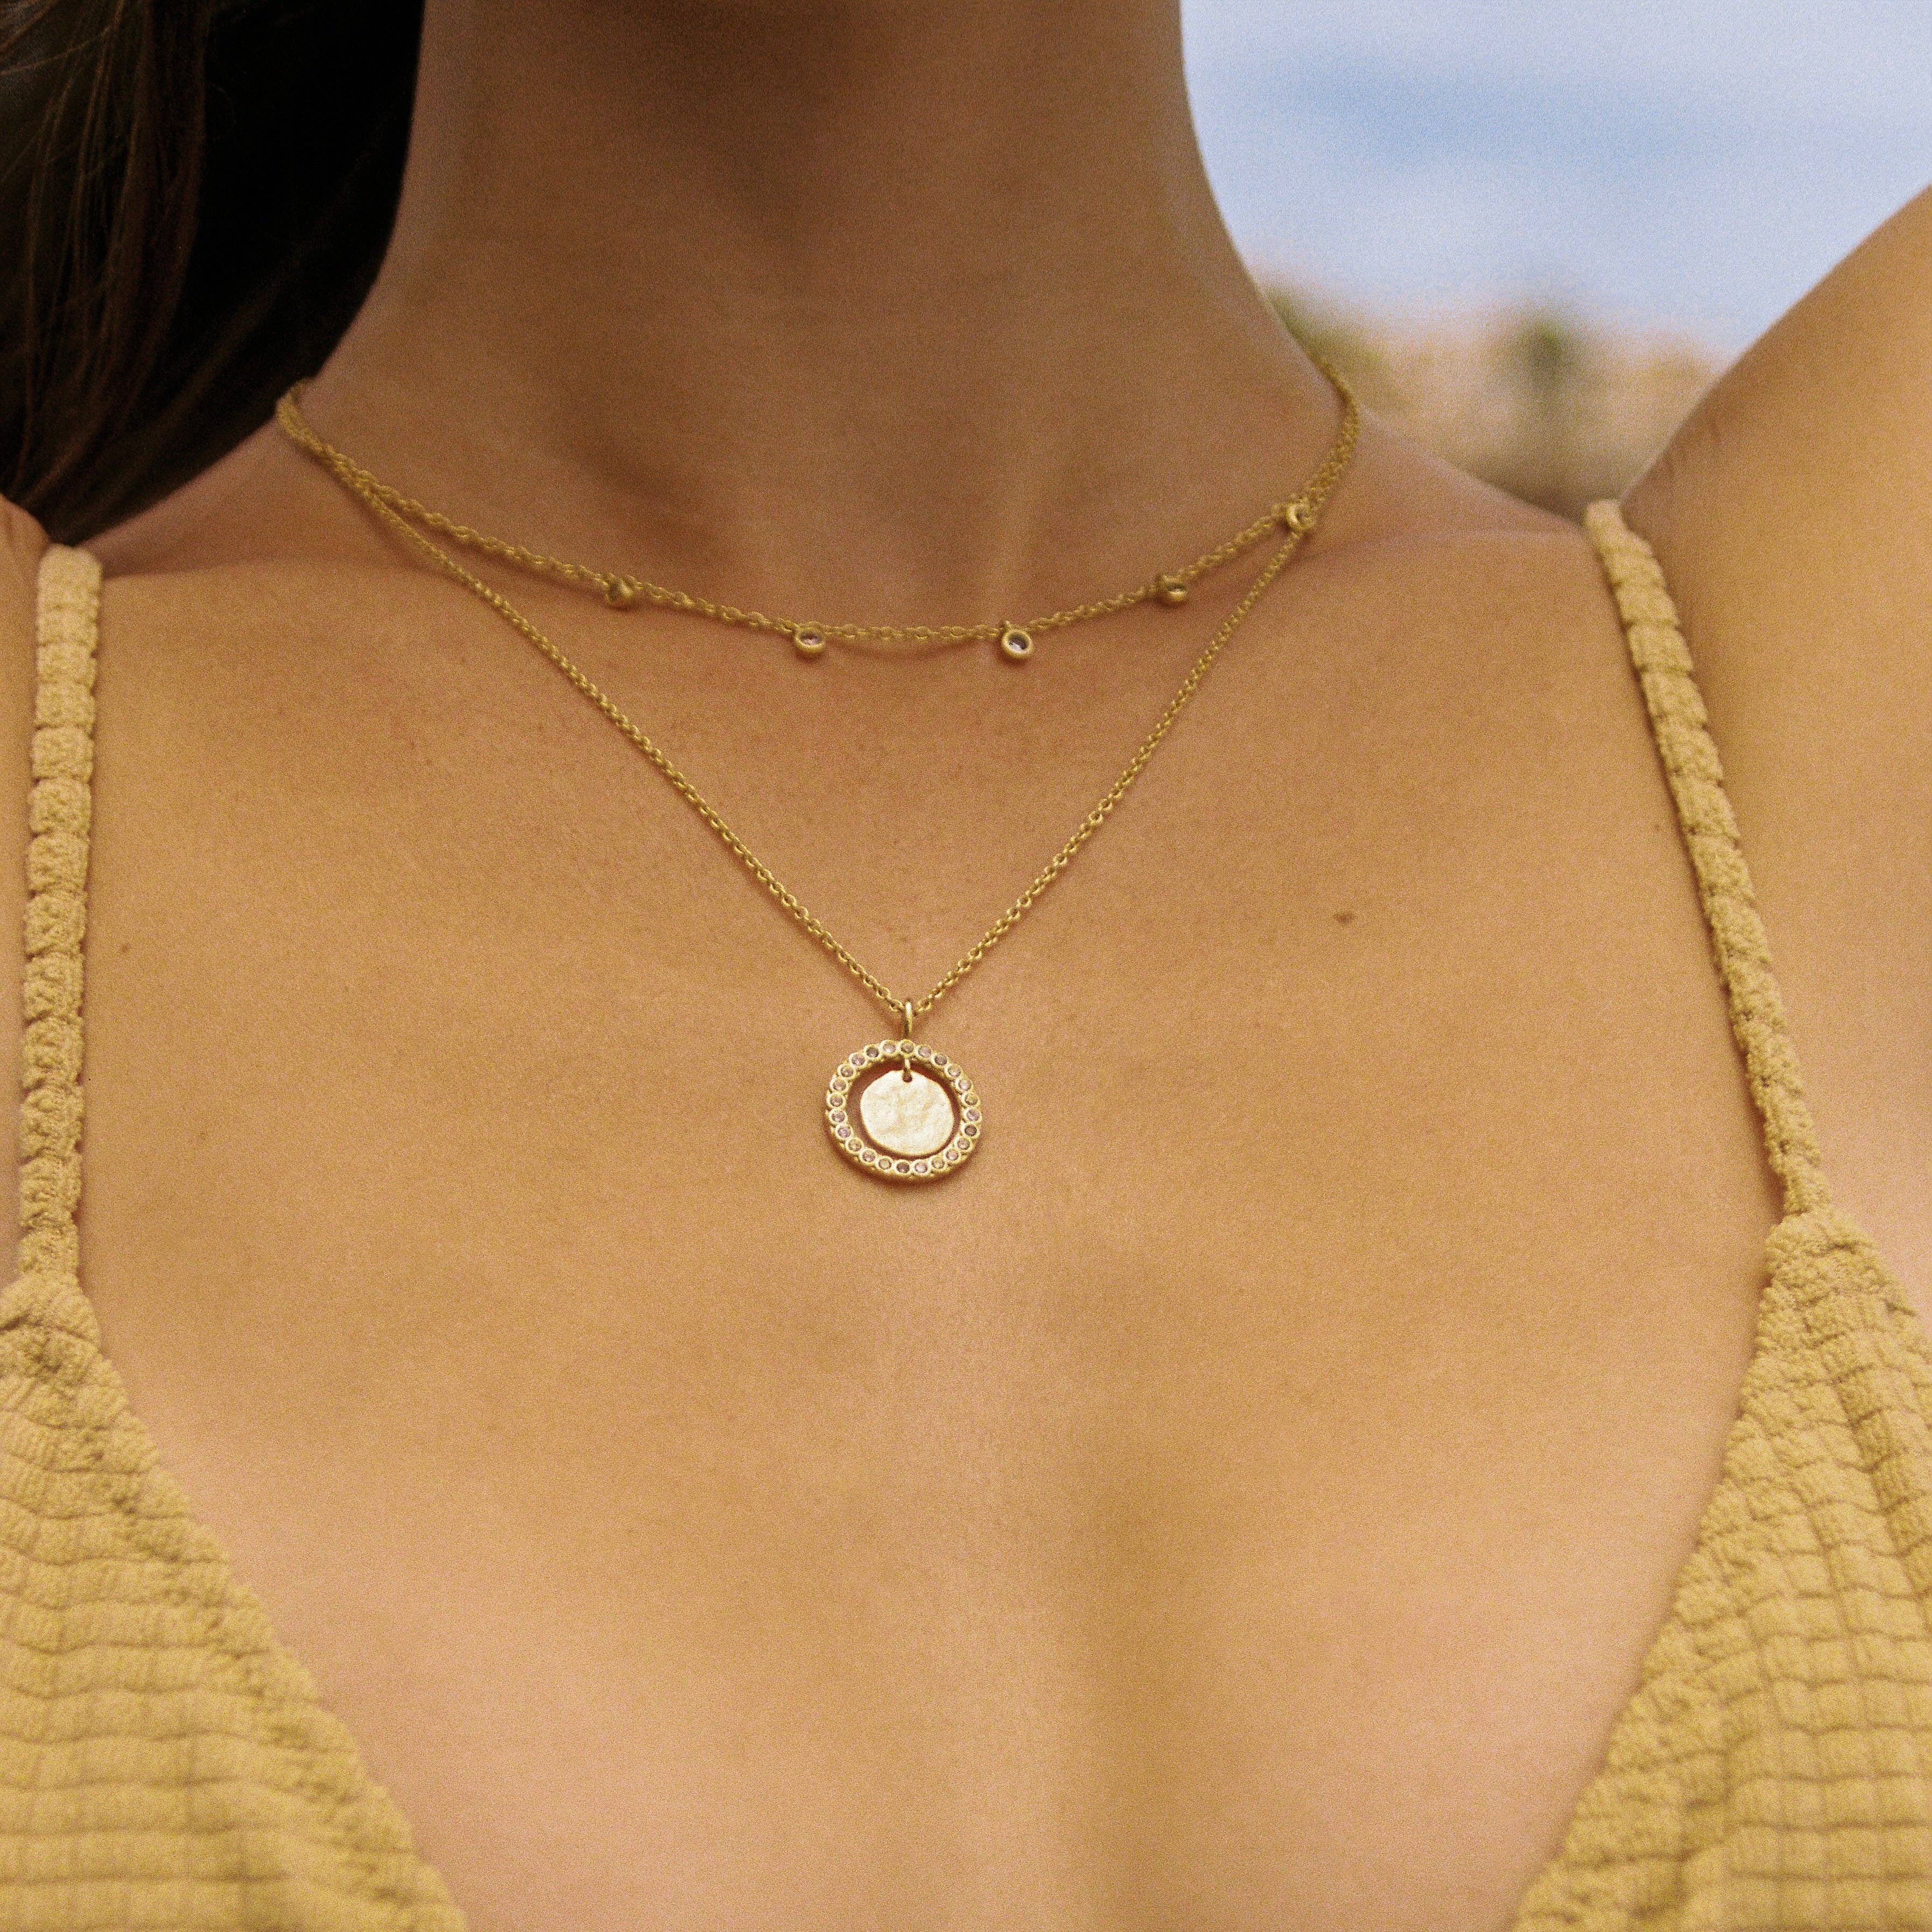 Indra Necklace | Jewelry Gold Gift Waterproof